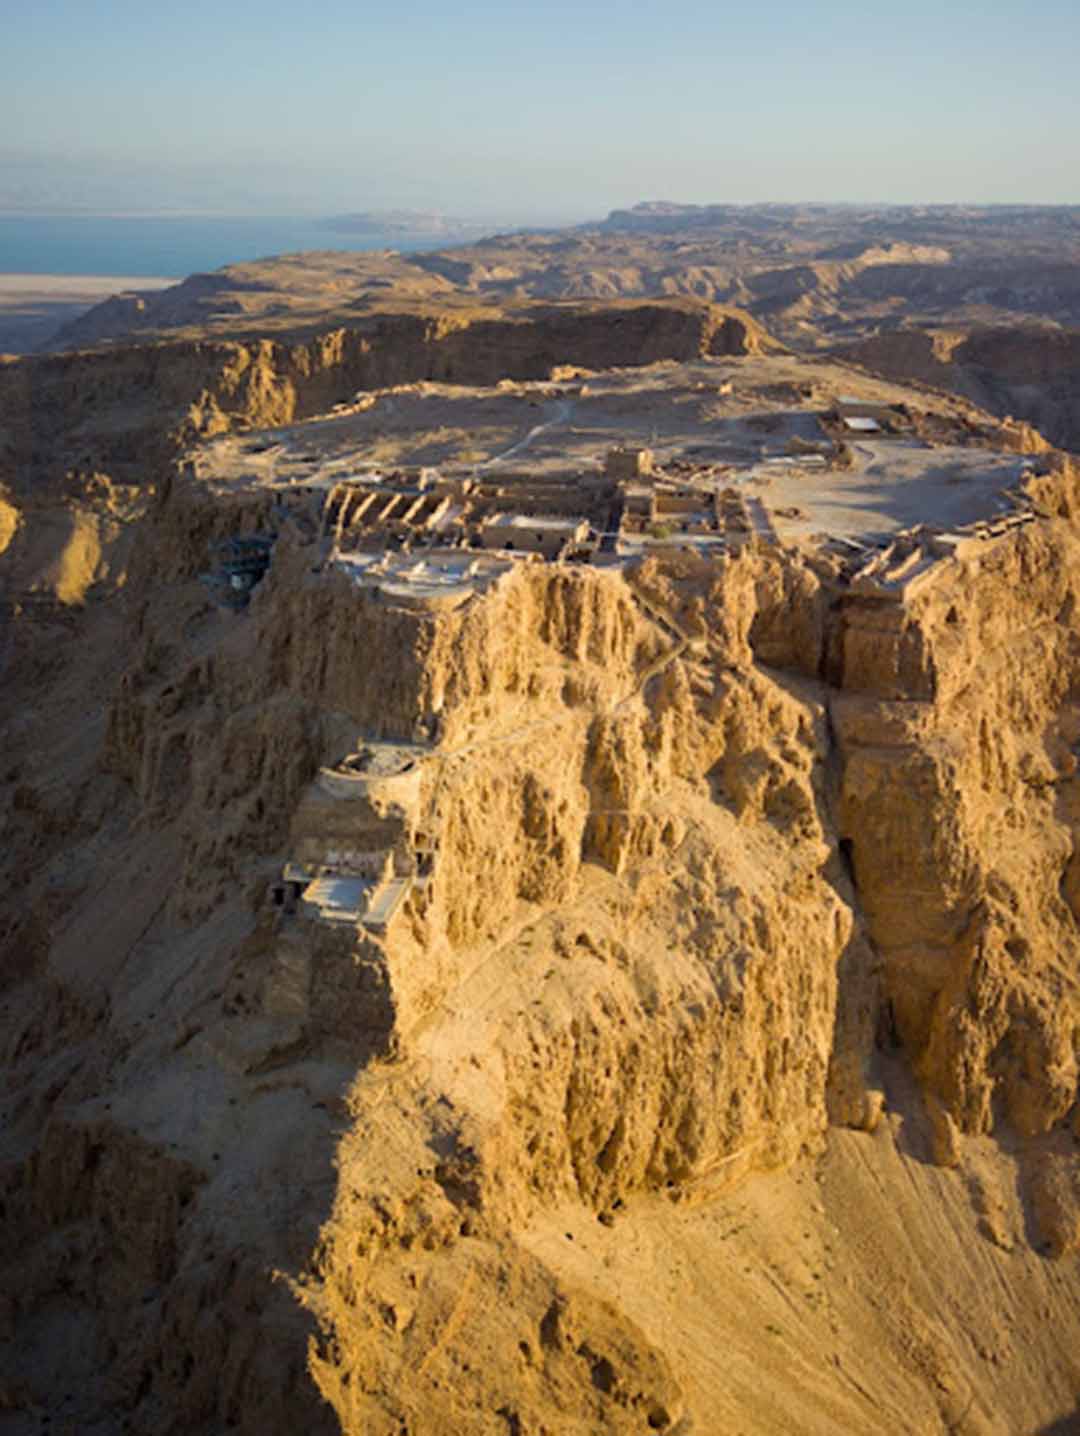 Masada fortress overlooking the Dead Sea in in southern Israel